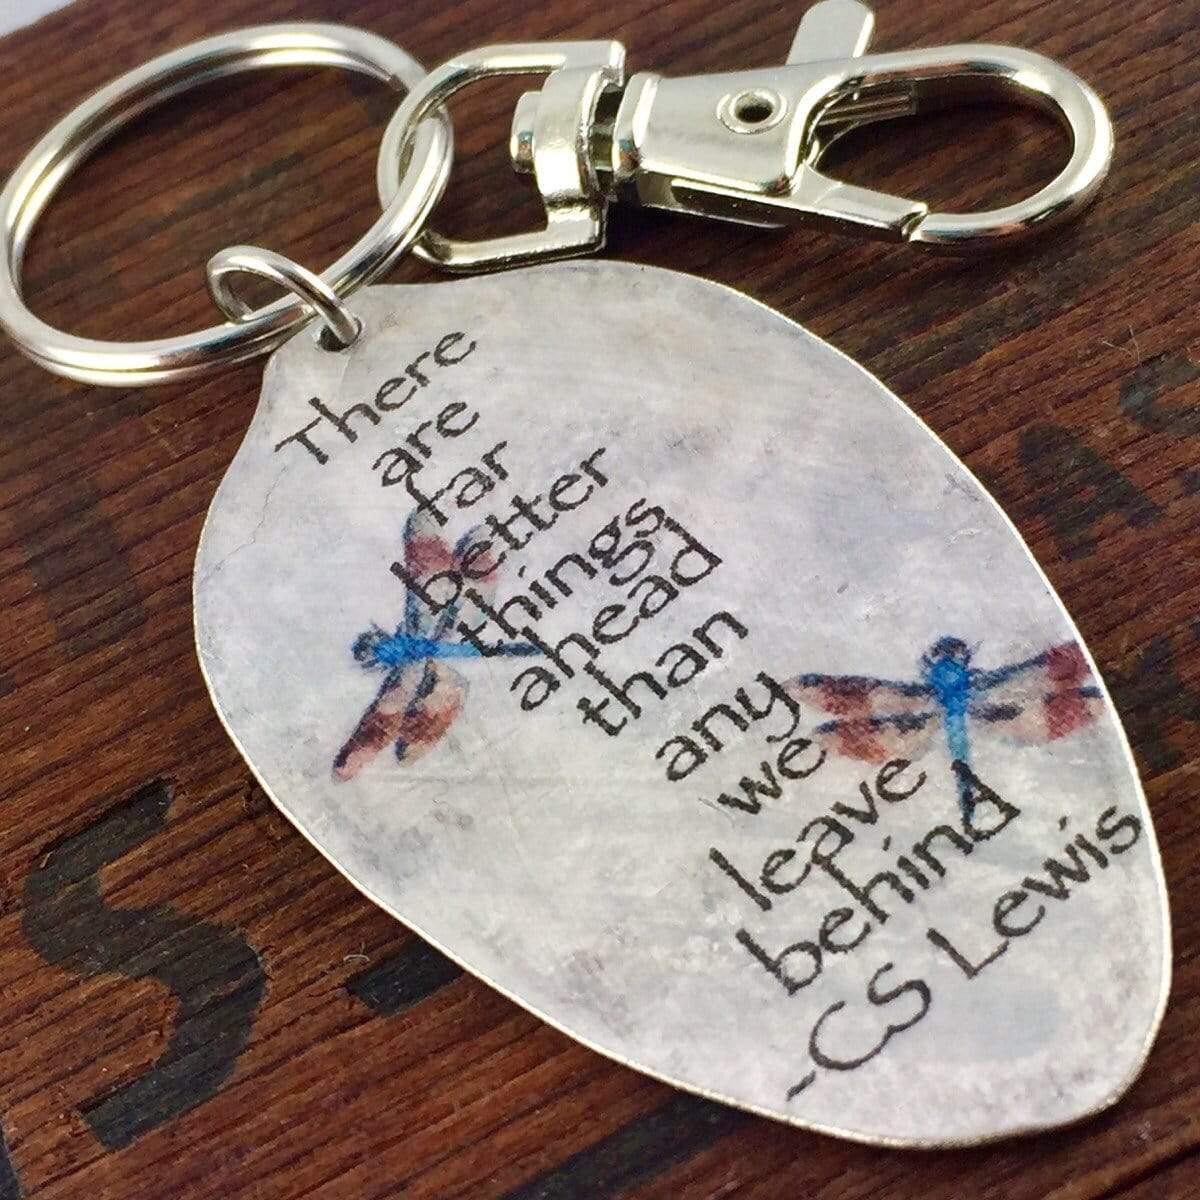 CS Lewis There are far better things ahead than any we leave behind Keychain, Inspiring Gift for Women, Silverware Jewelry - KyleeMae Designs